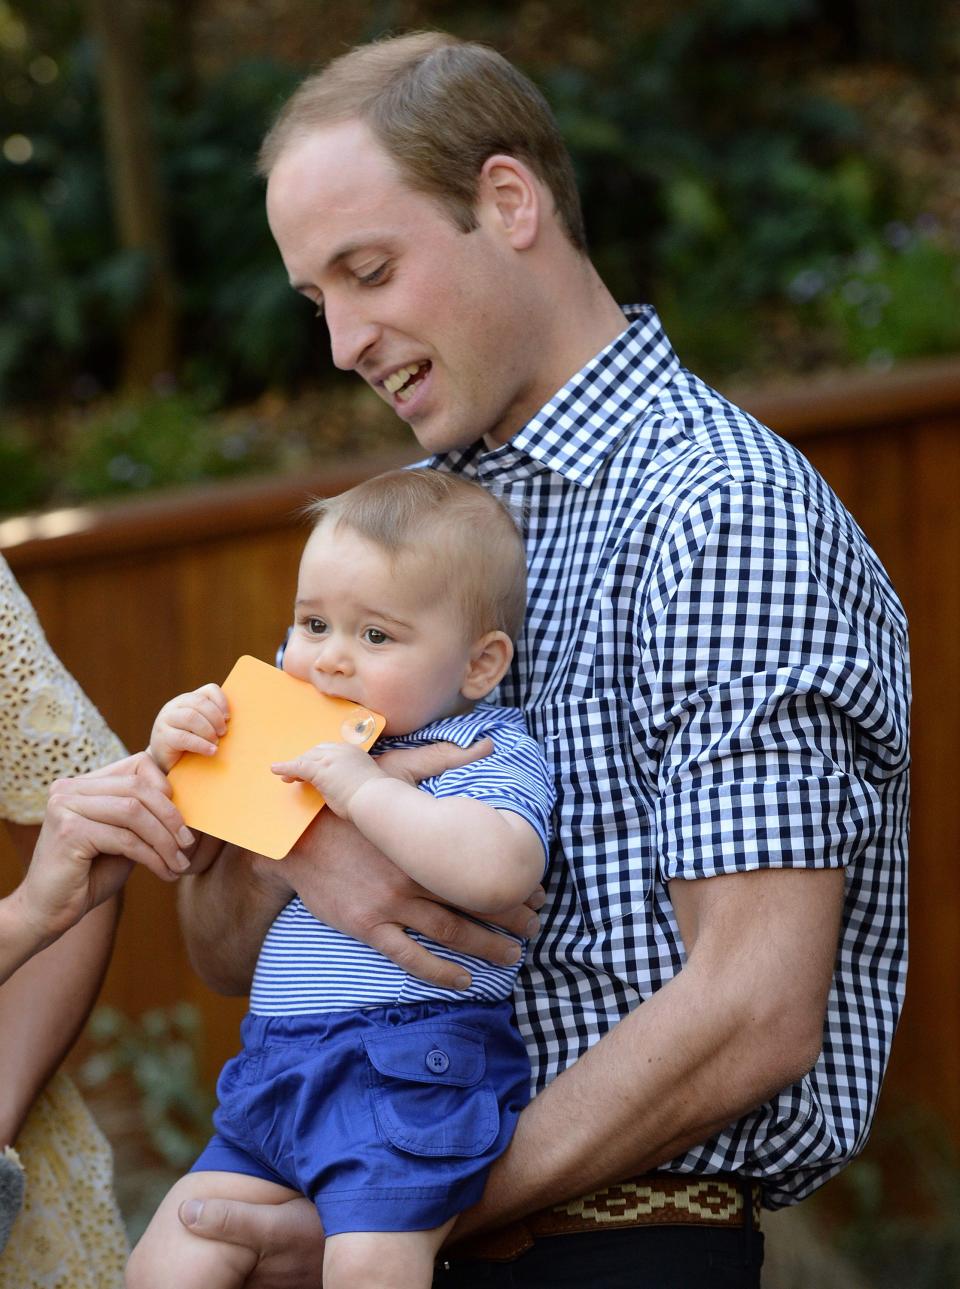 Prince William and Prince George at Taronga Zoo on April 20, 2014 in Sydney, Australia.